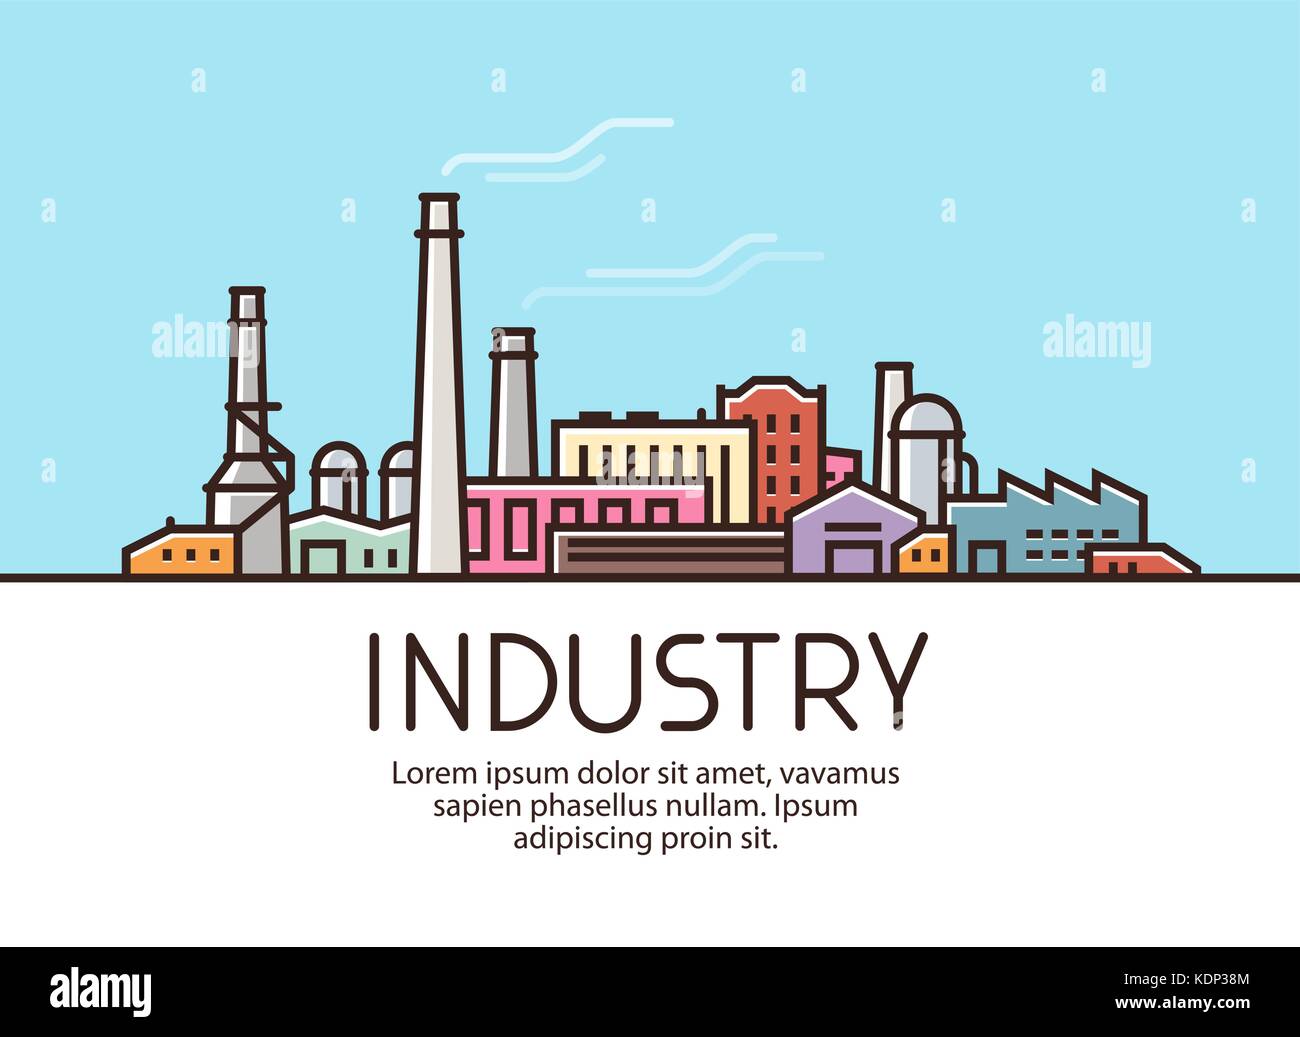 Industry banner. Industrial production, factory building concept. Vector illustration Stock Vector